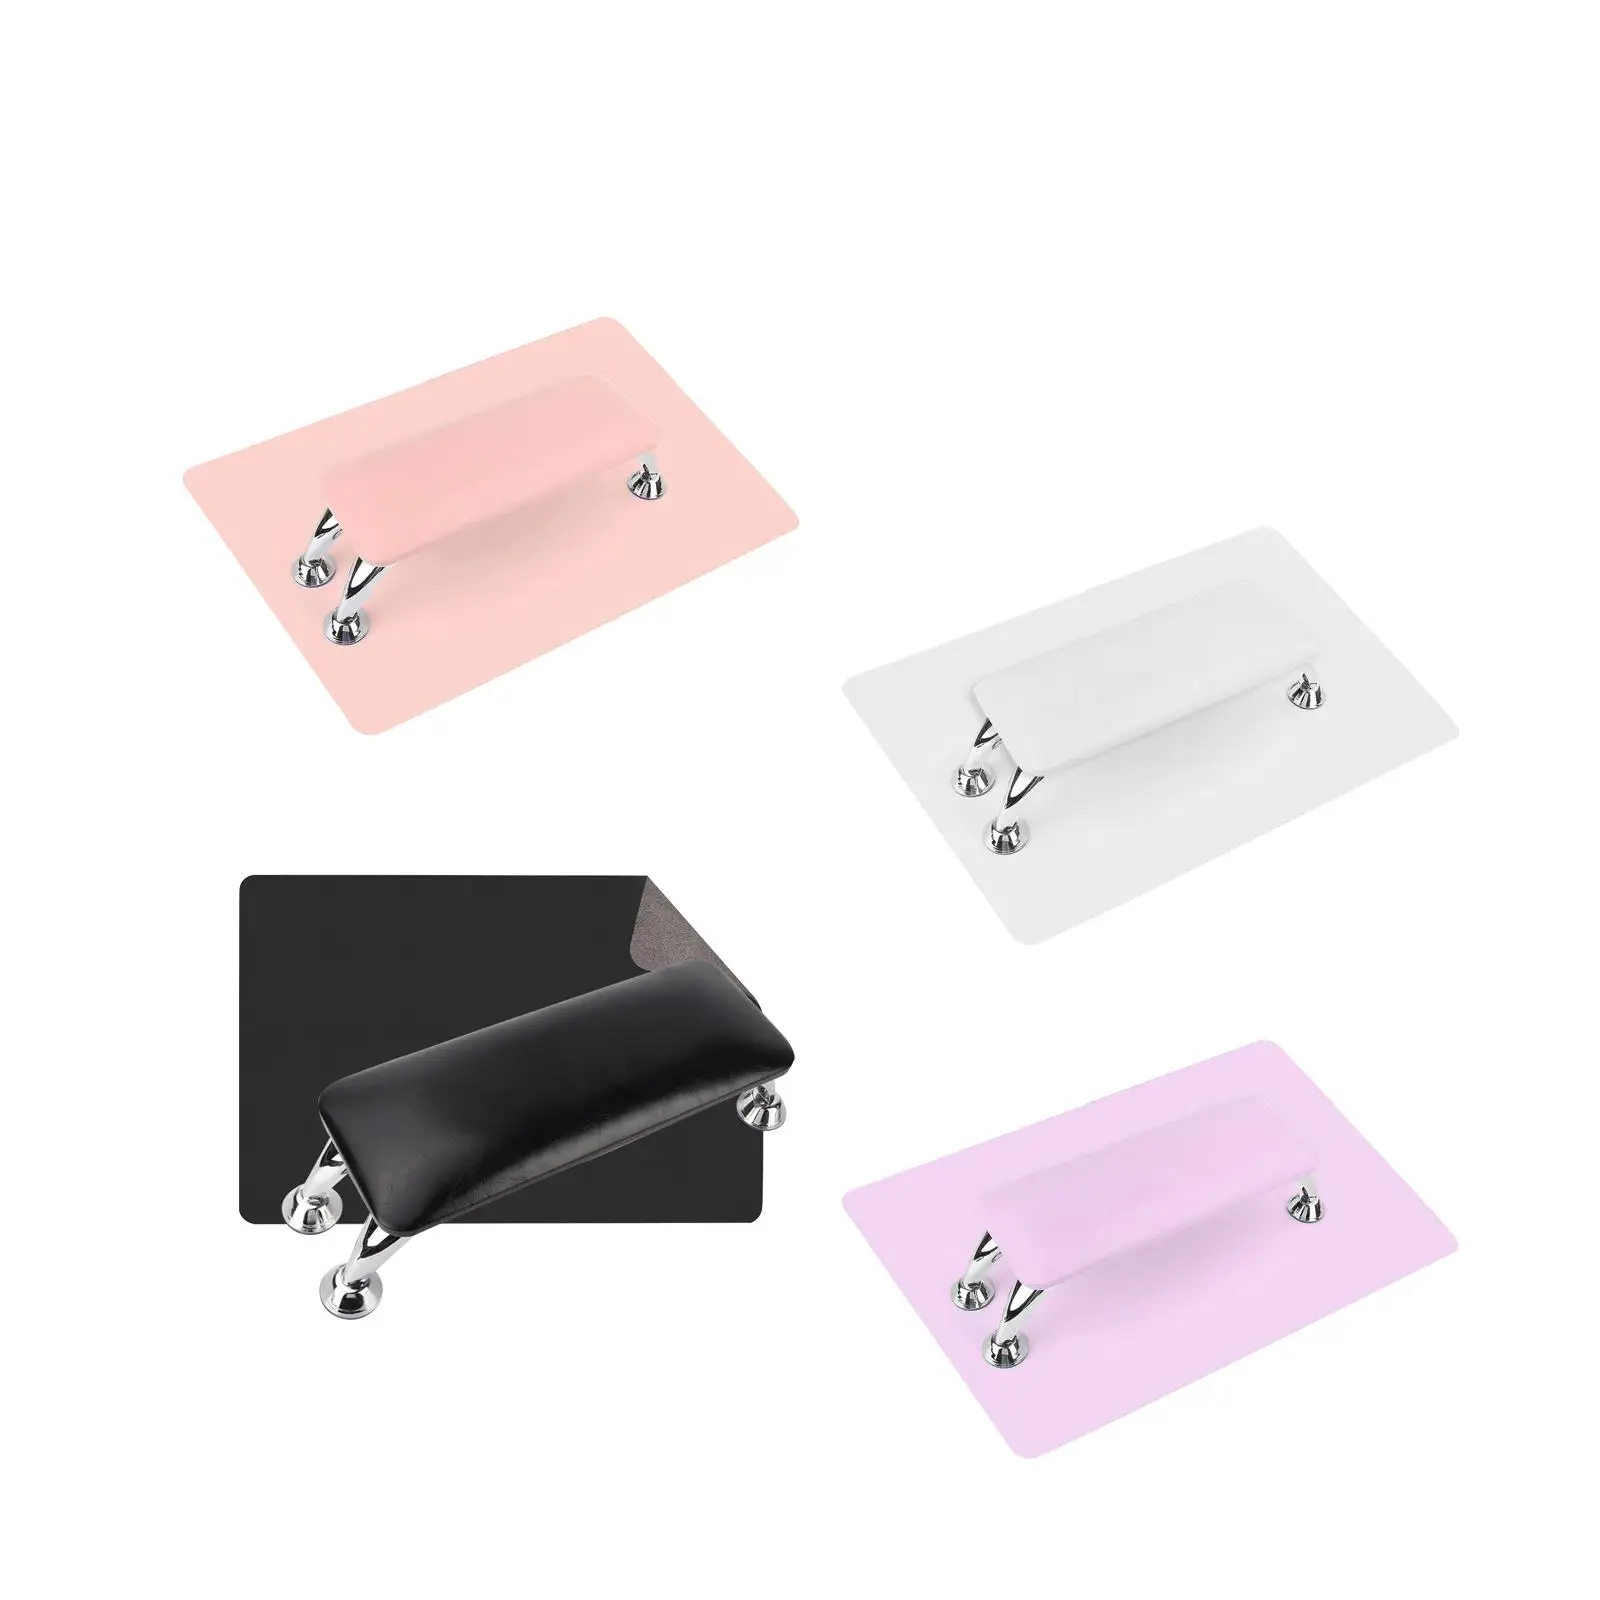 Nail Hand Pillow with Pad Waterproof Soft Non Slip Professional Nail Rest Cushion Table Desk Station for Manicure Salon Nail Art